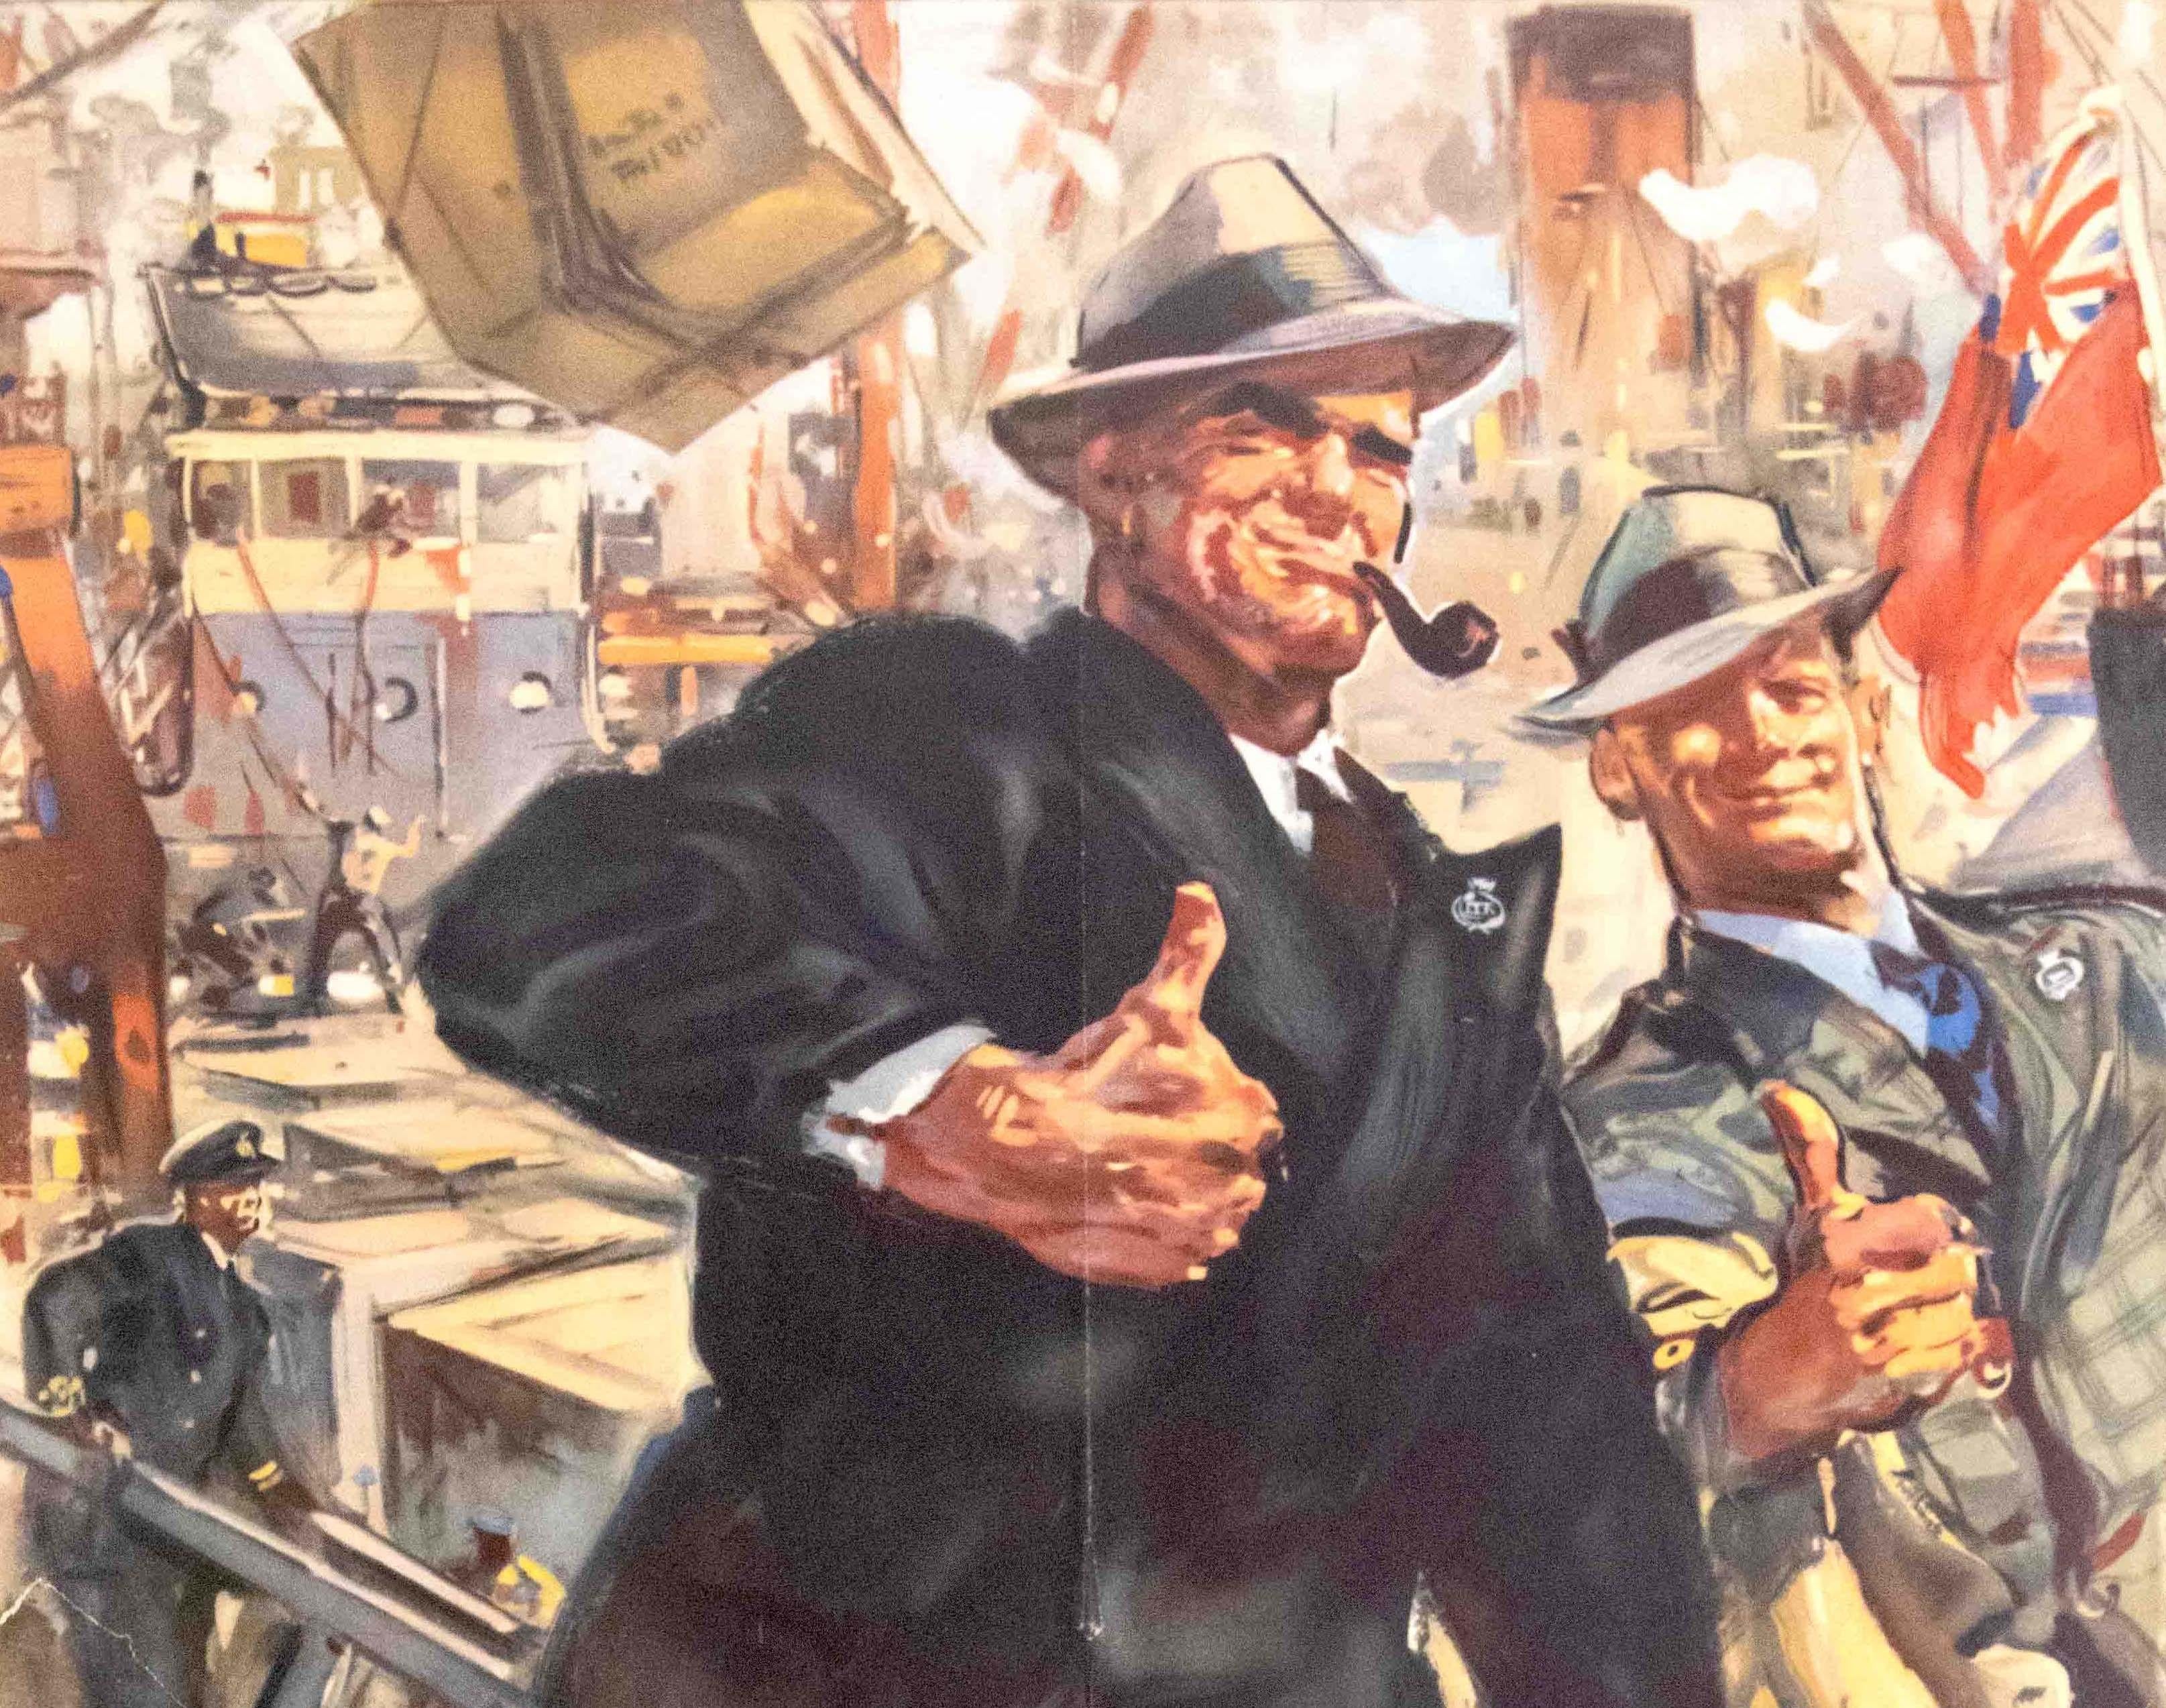 Original vintage World War Two poster - To the Merchant Navy Thank You! - featuring two men wearing suits and hats and holding briefcases, one smoking a pipe, showing their thumbs up to the viewer with a busy dockyard and smoke in the background